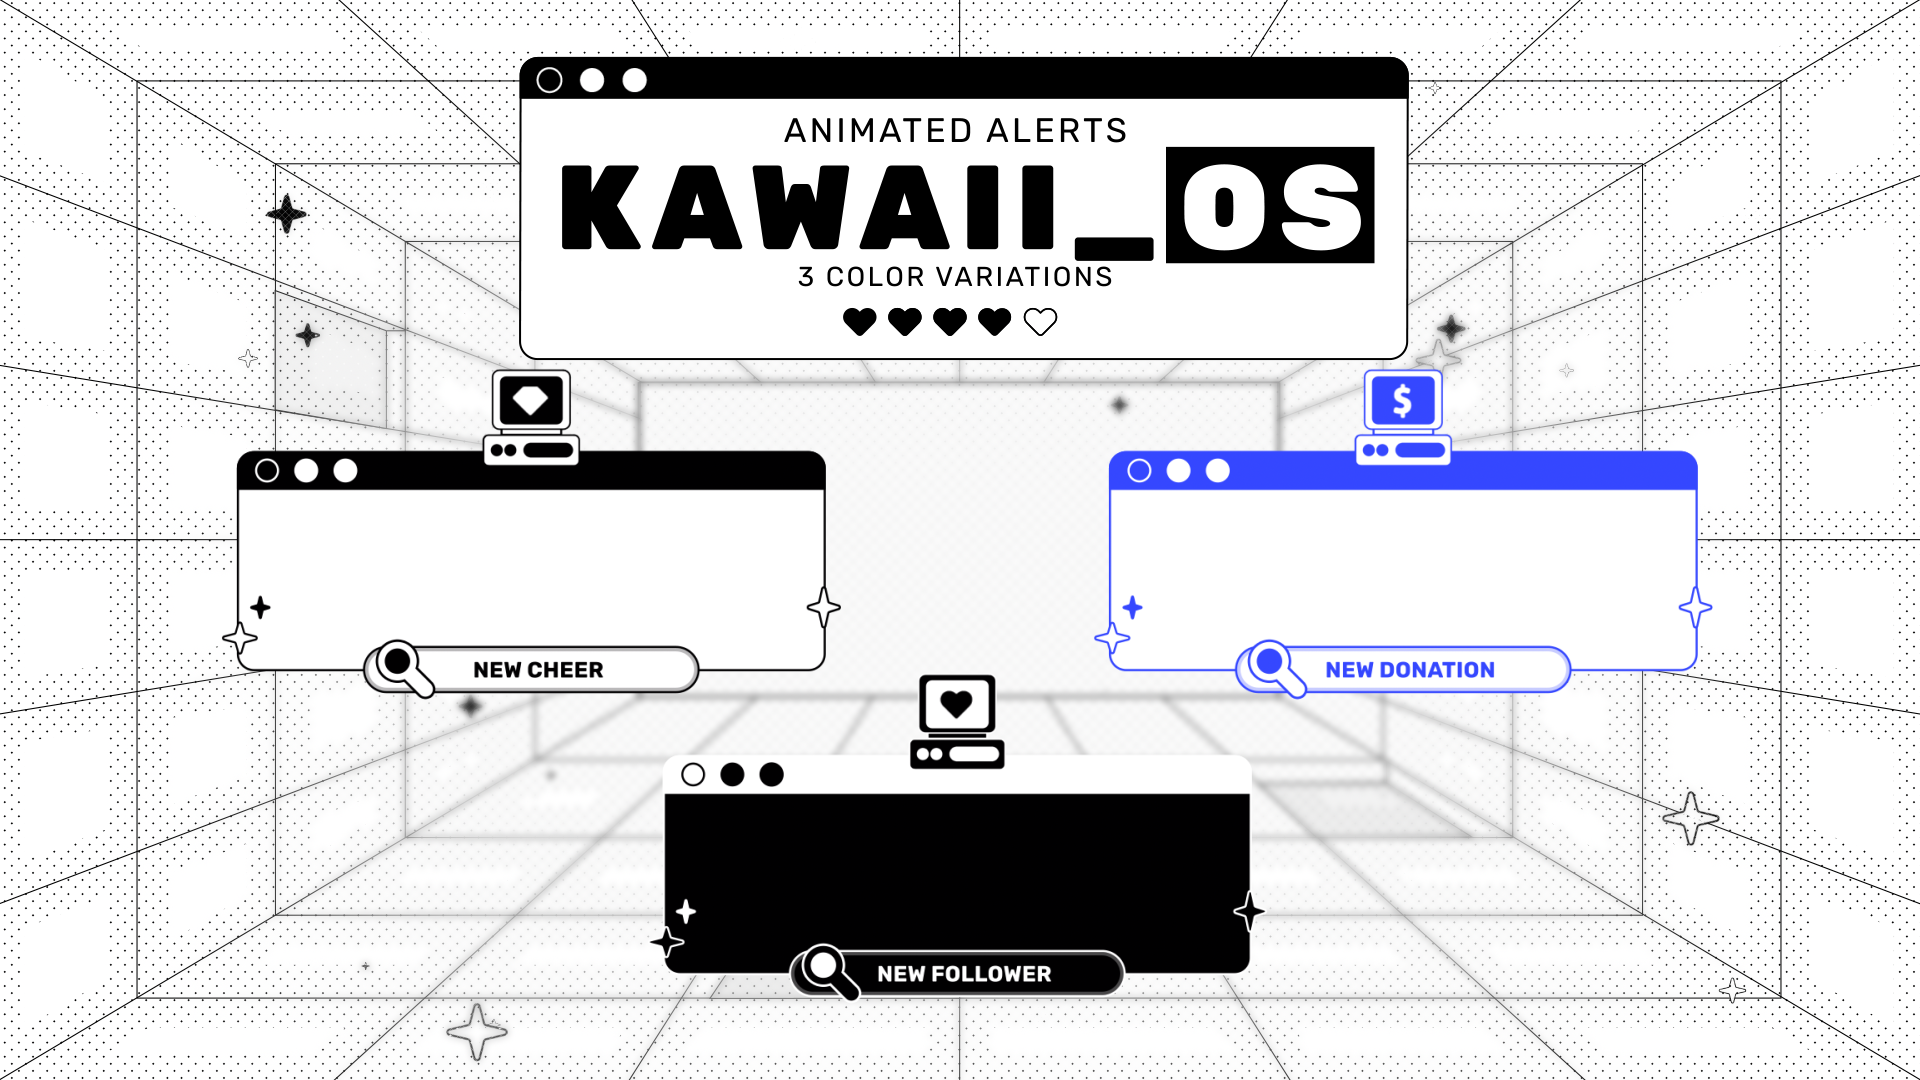 Kawaii OS - Animated Alerts for Twitch, Youtube and Facebook Gaming